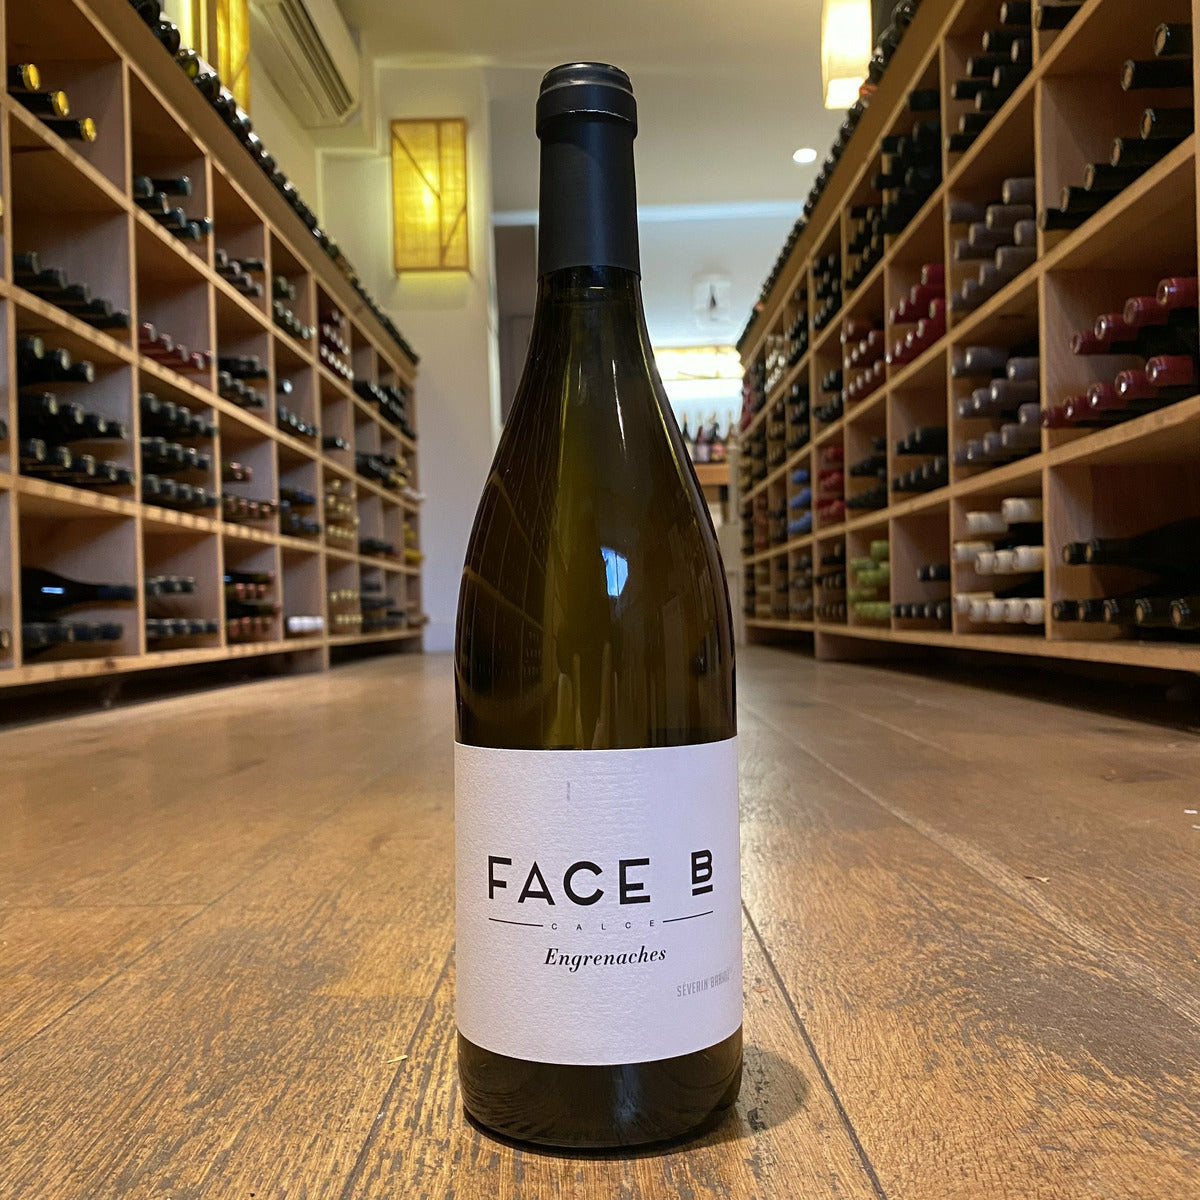 Face B, "Engrenaches" 2019